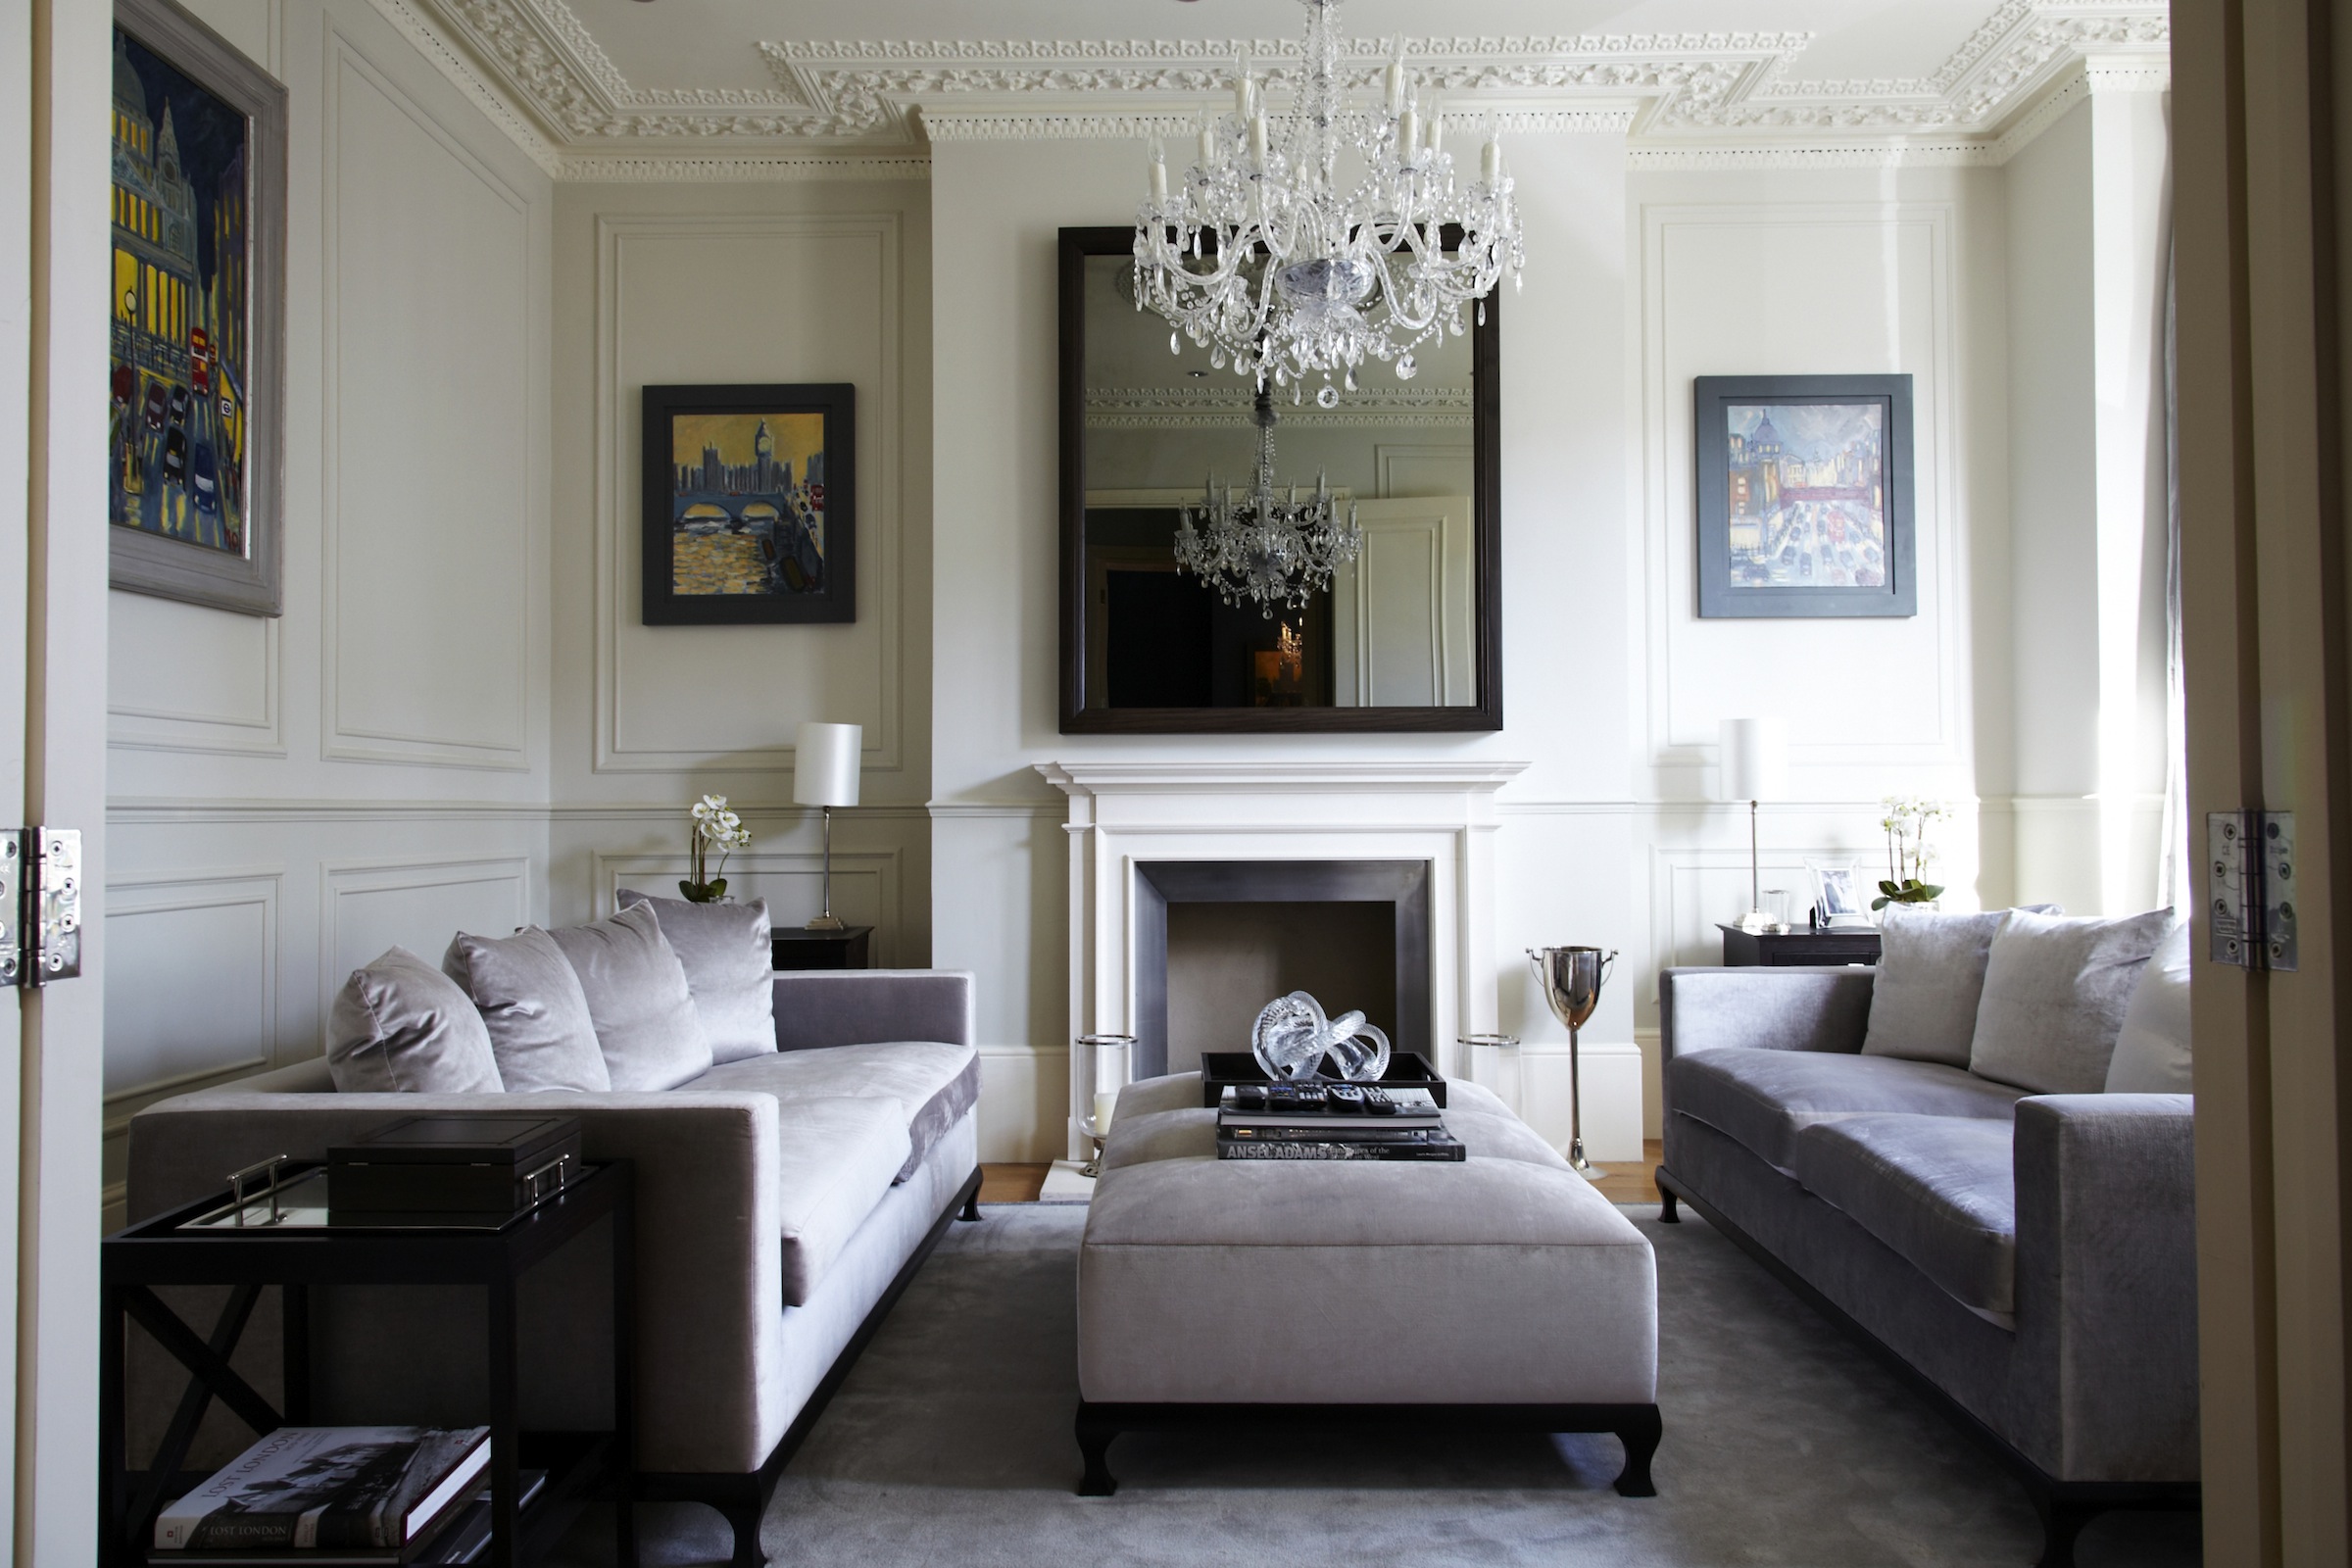 Modern Victorian Decorating Ideas: Combining Contemporary And Classic Styles